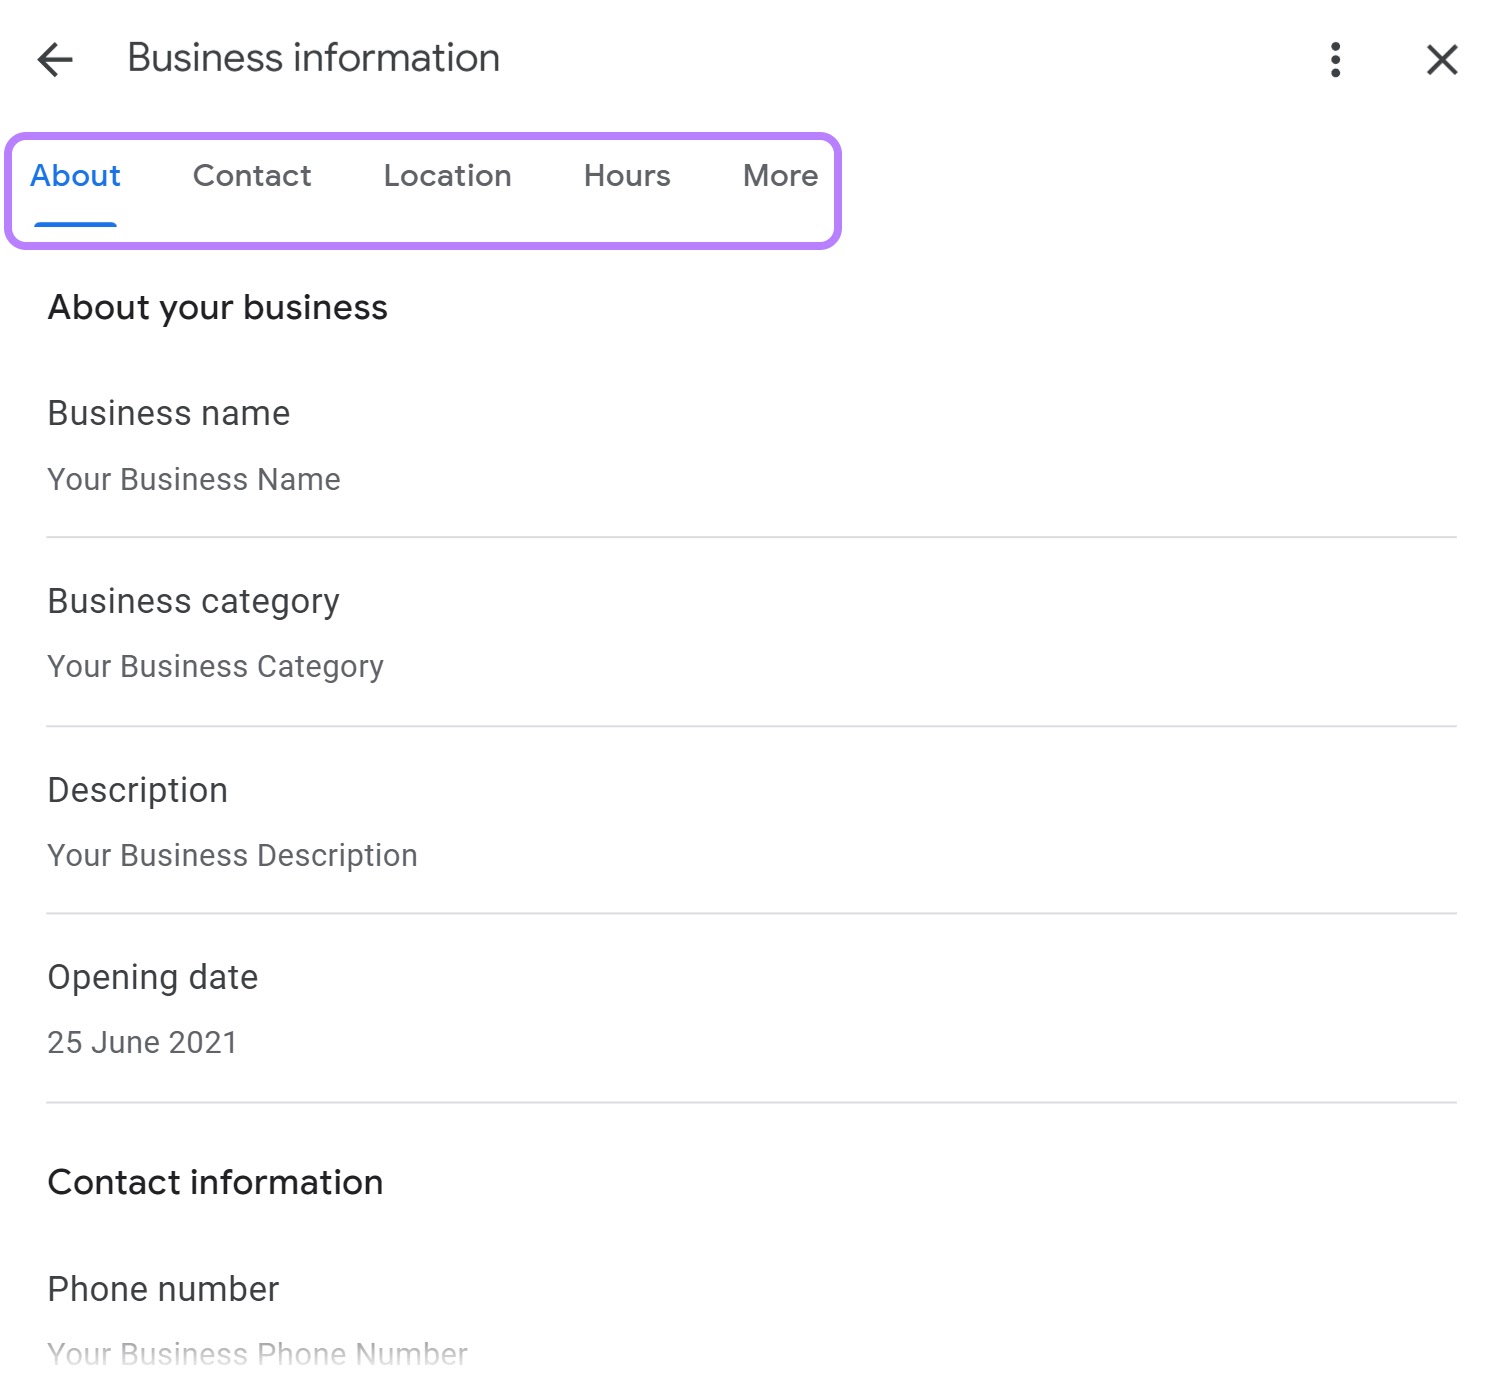 "Business information" page on GBP dashboard